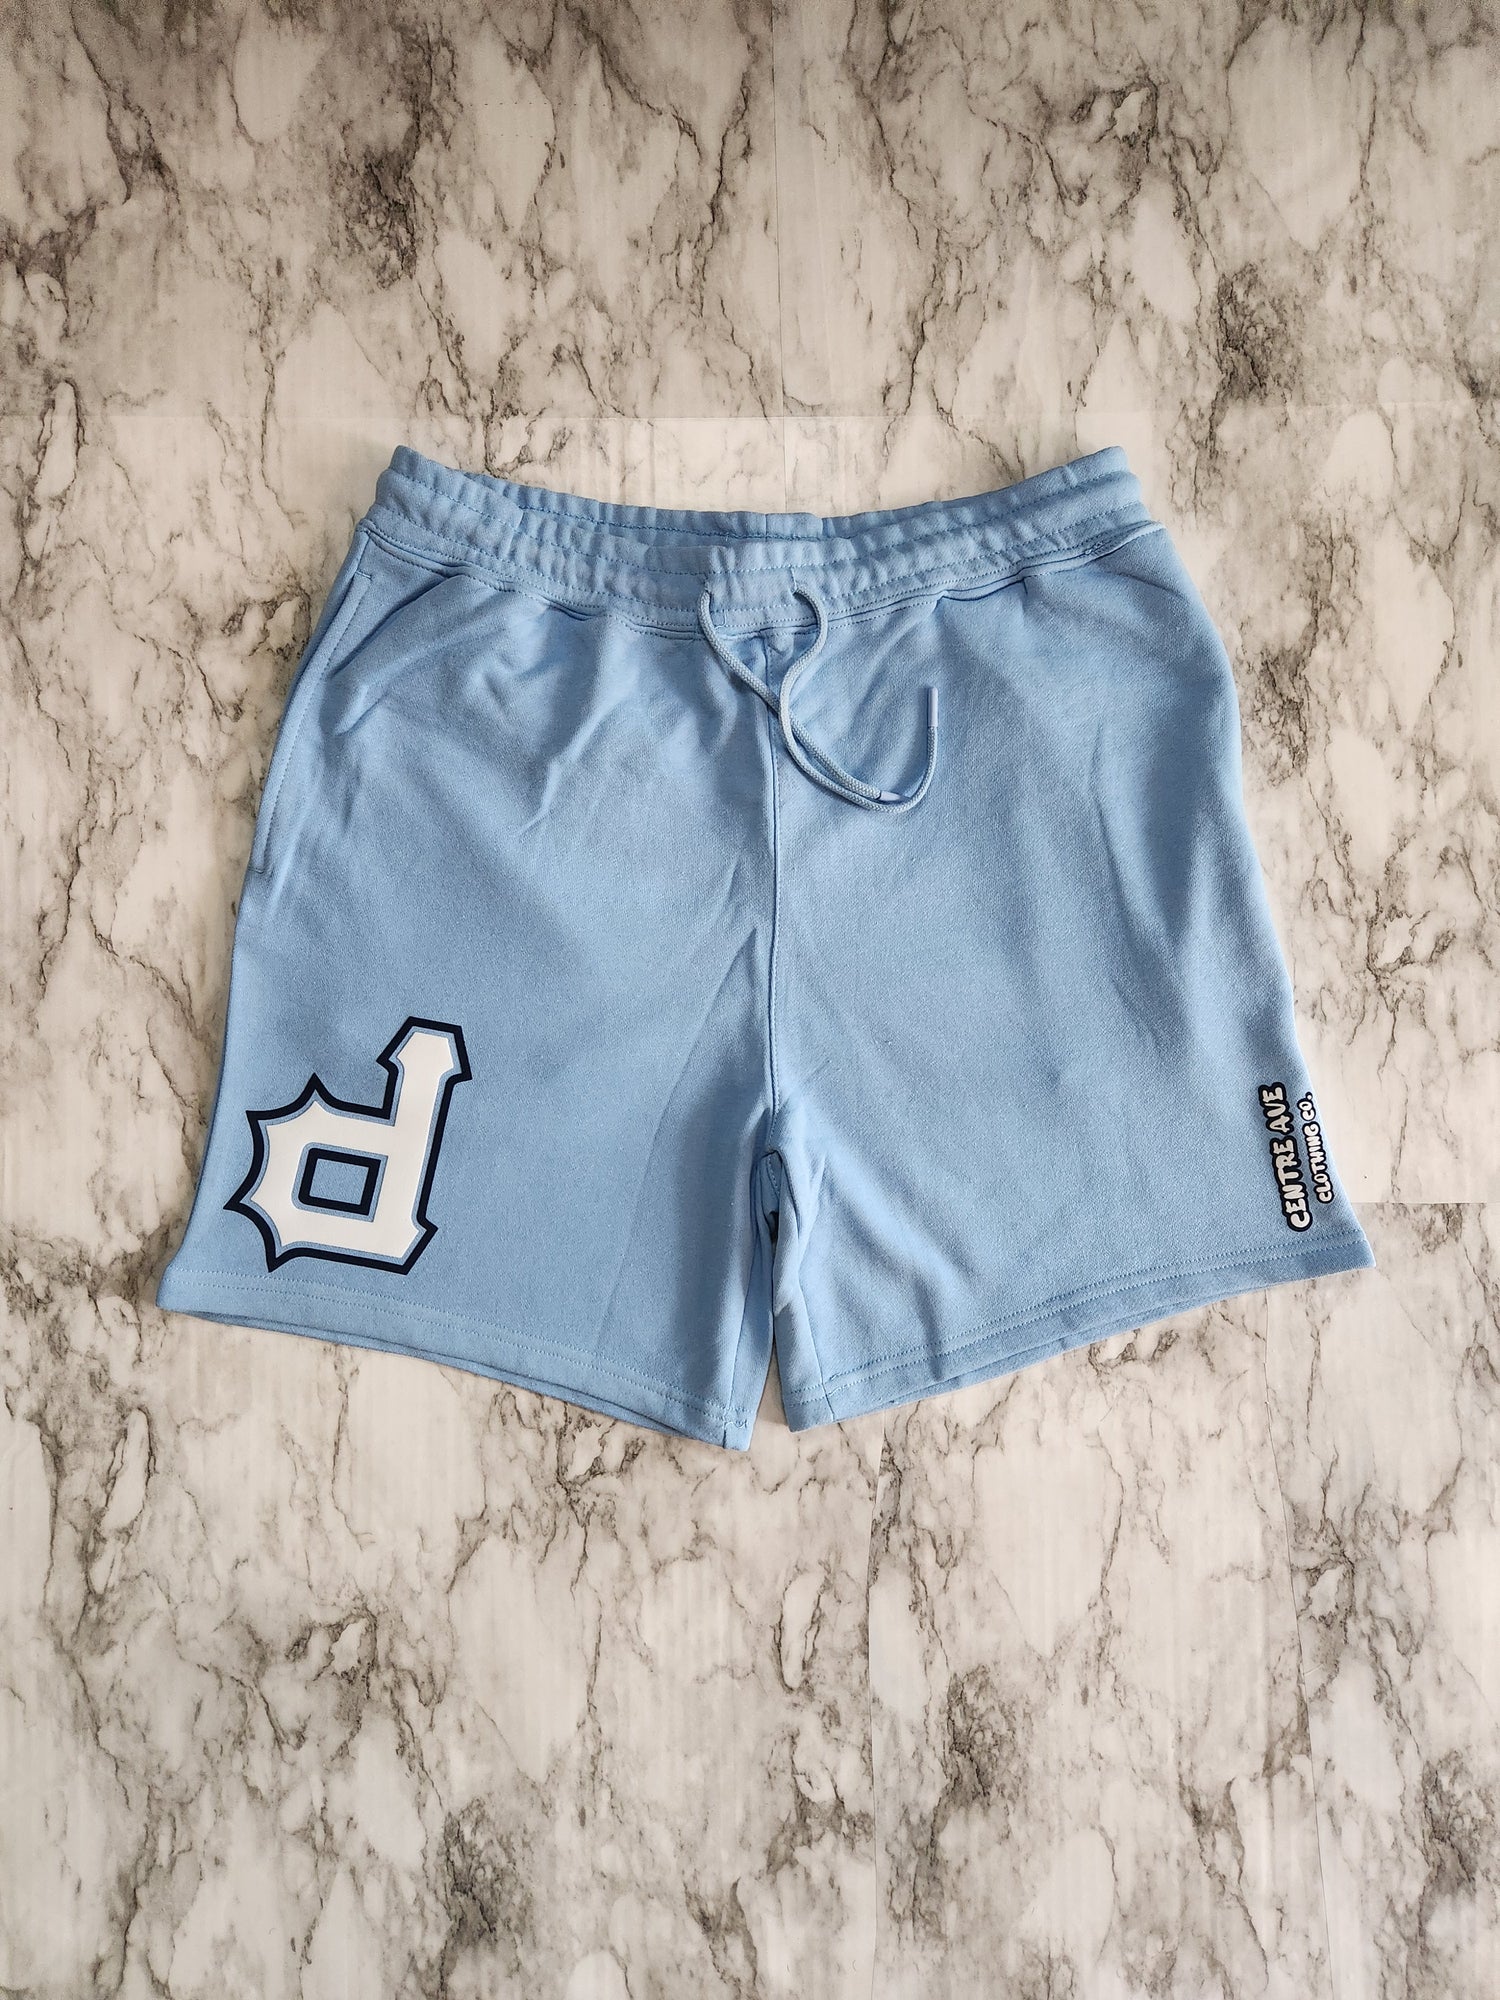 P Shorts - Centre Ave Clothing Co.